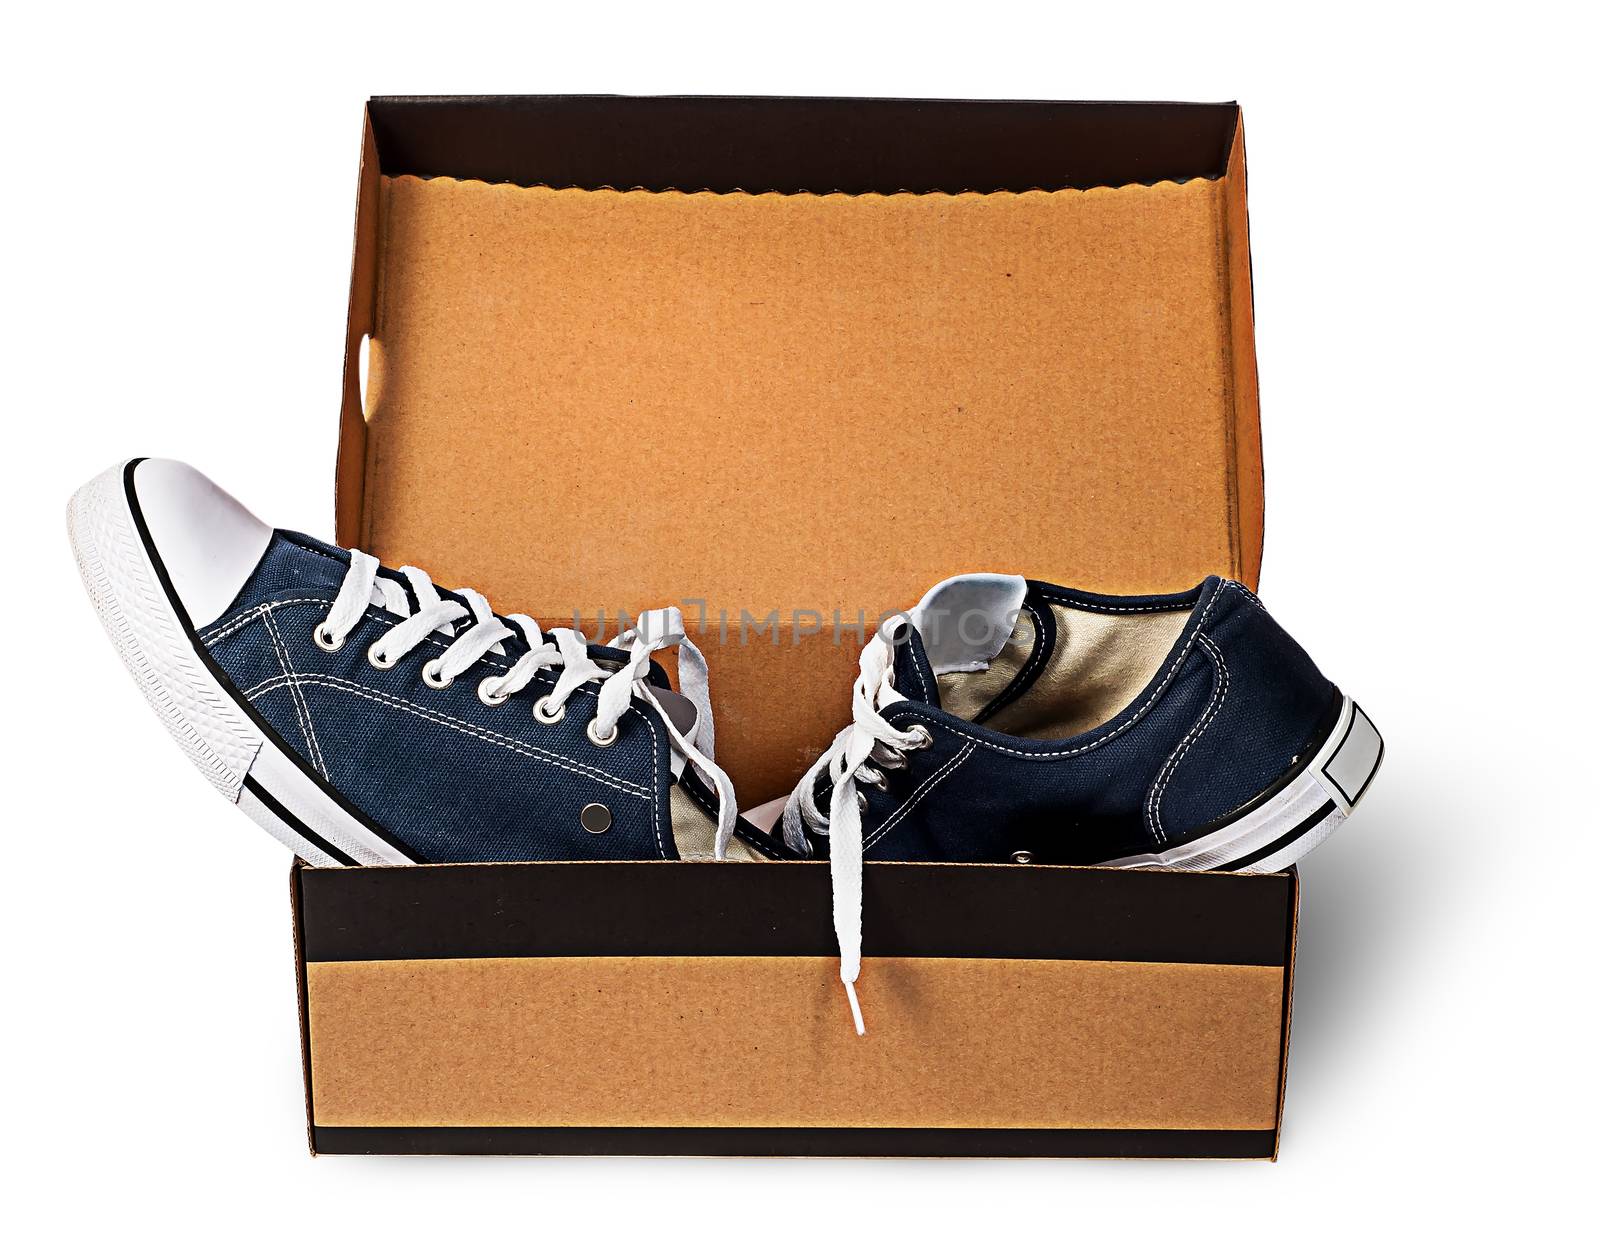 Dark blue sports shoes abandoned in a cardboard box isolated on white background